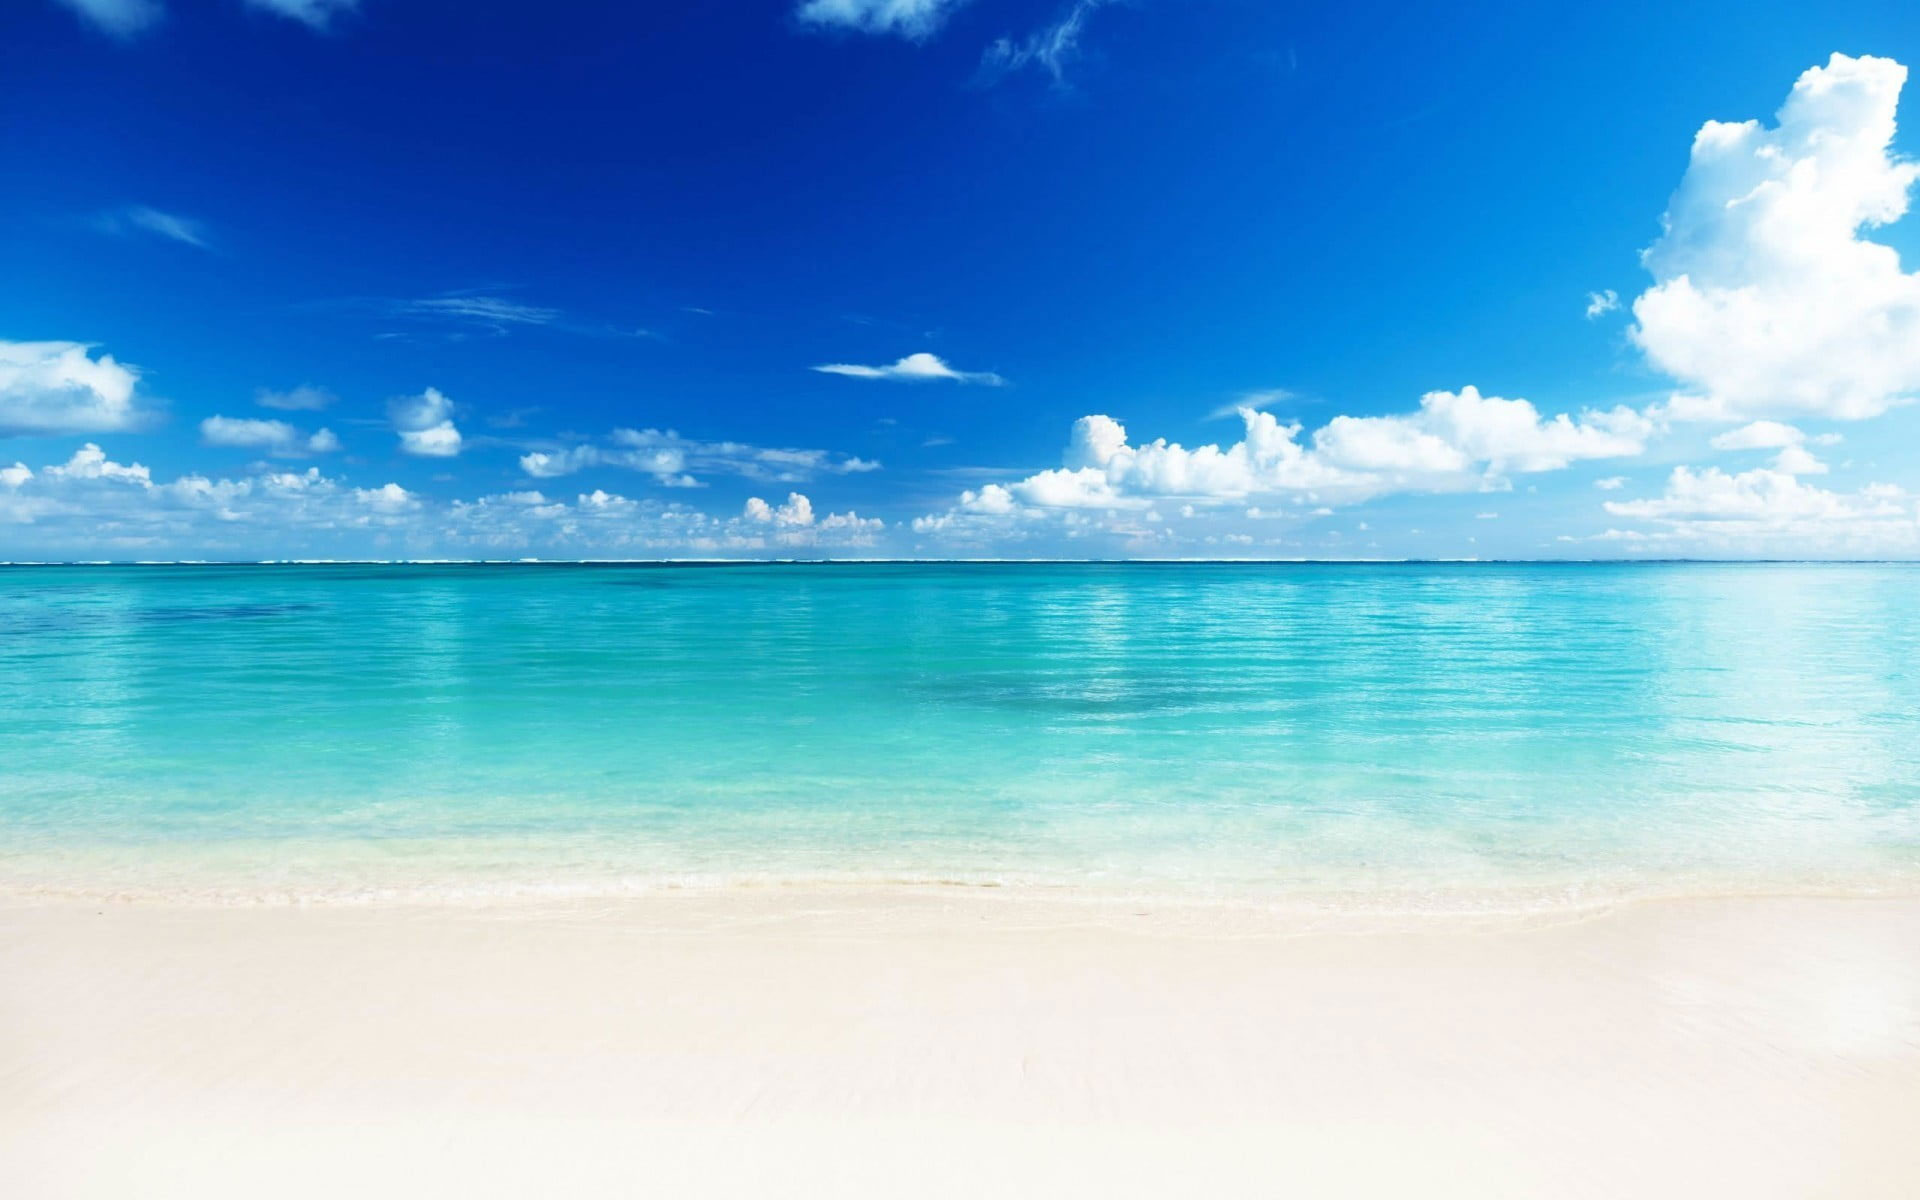 Beach during daytime wallpaper, landscape, tropical, sea, sky, tranquil scene, beach during daytime, Empty